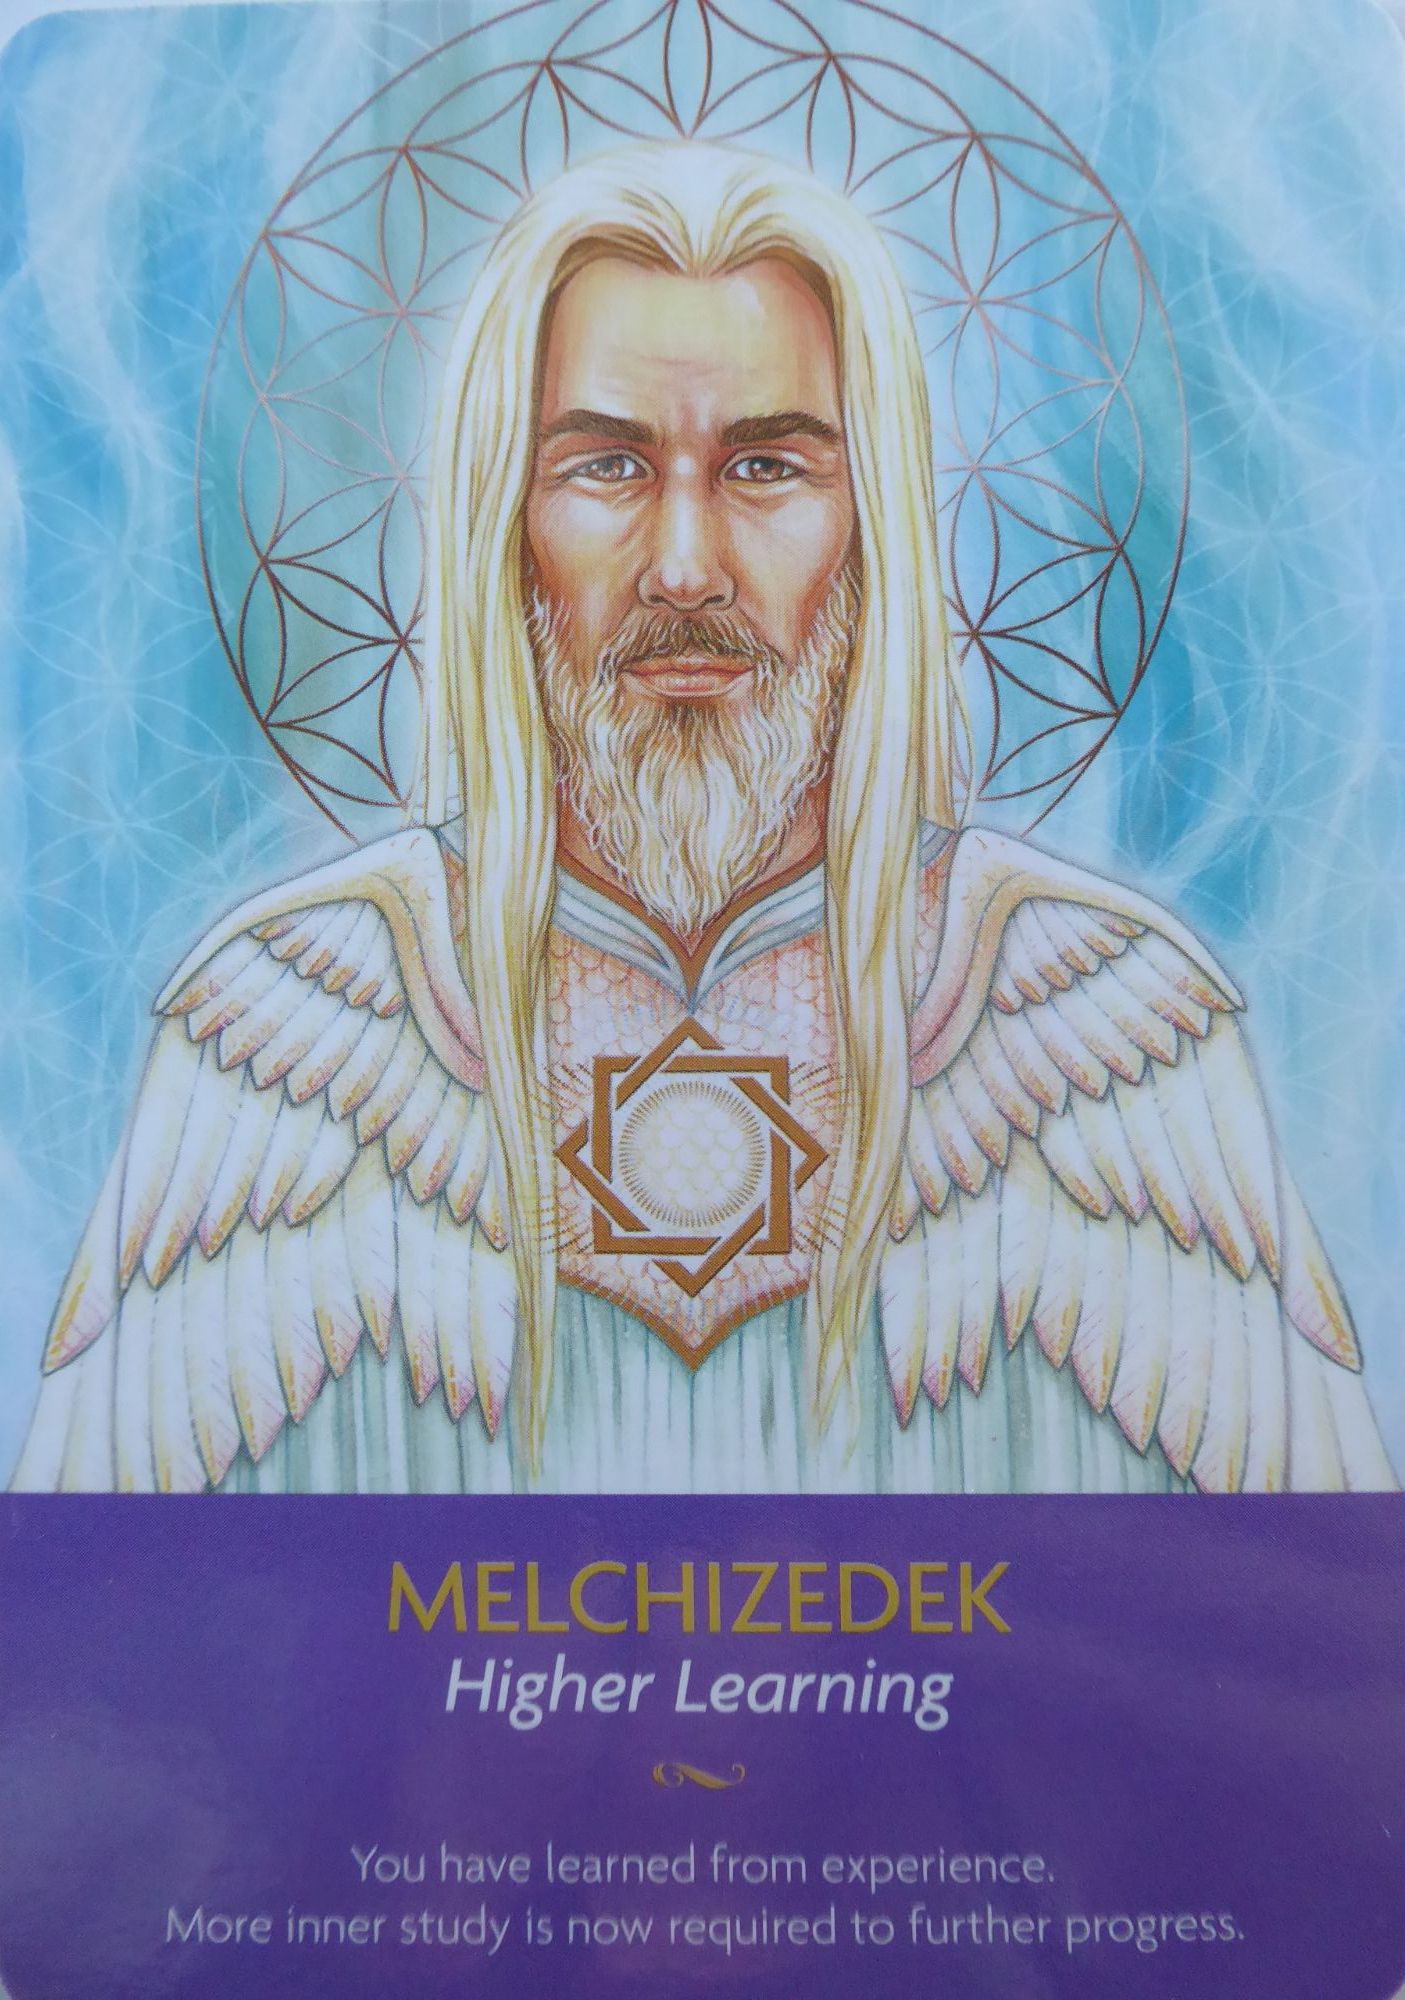 Masters of Light Wisdom Oracle